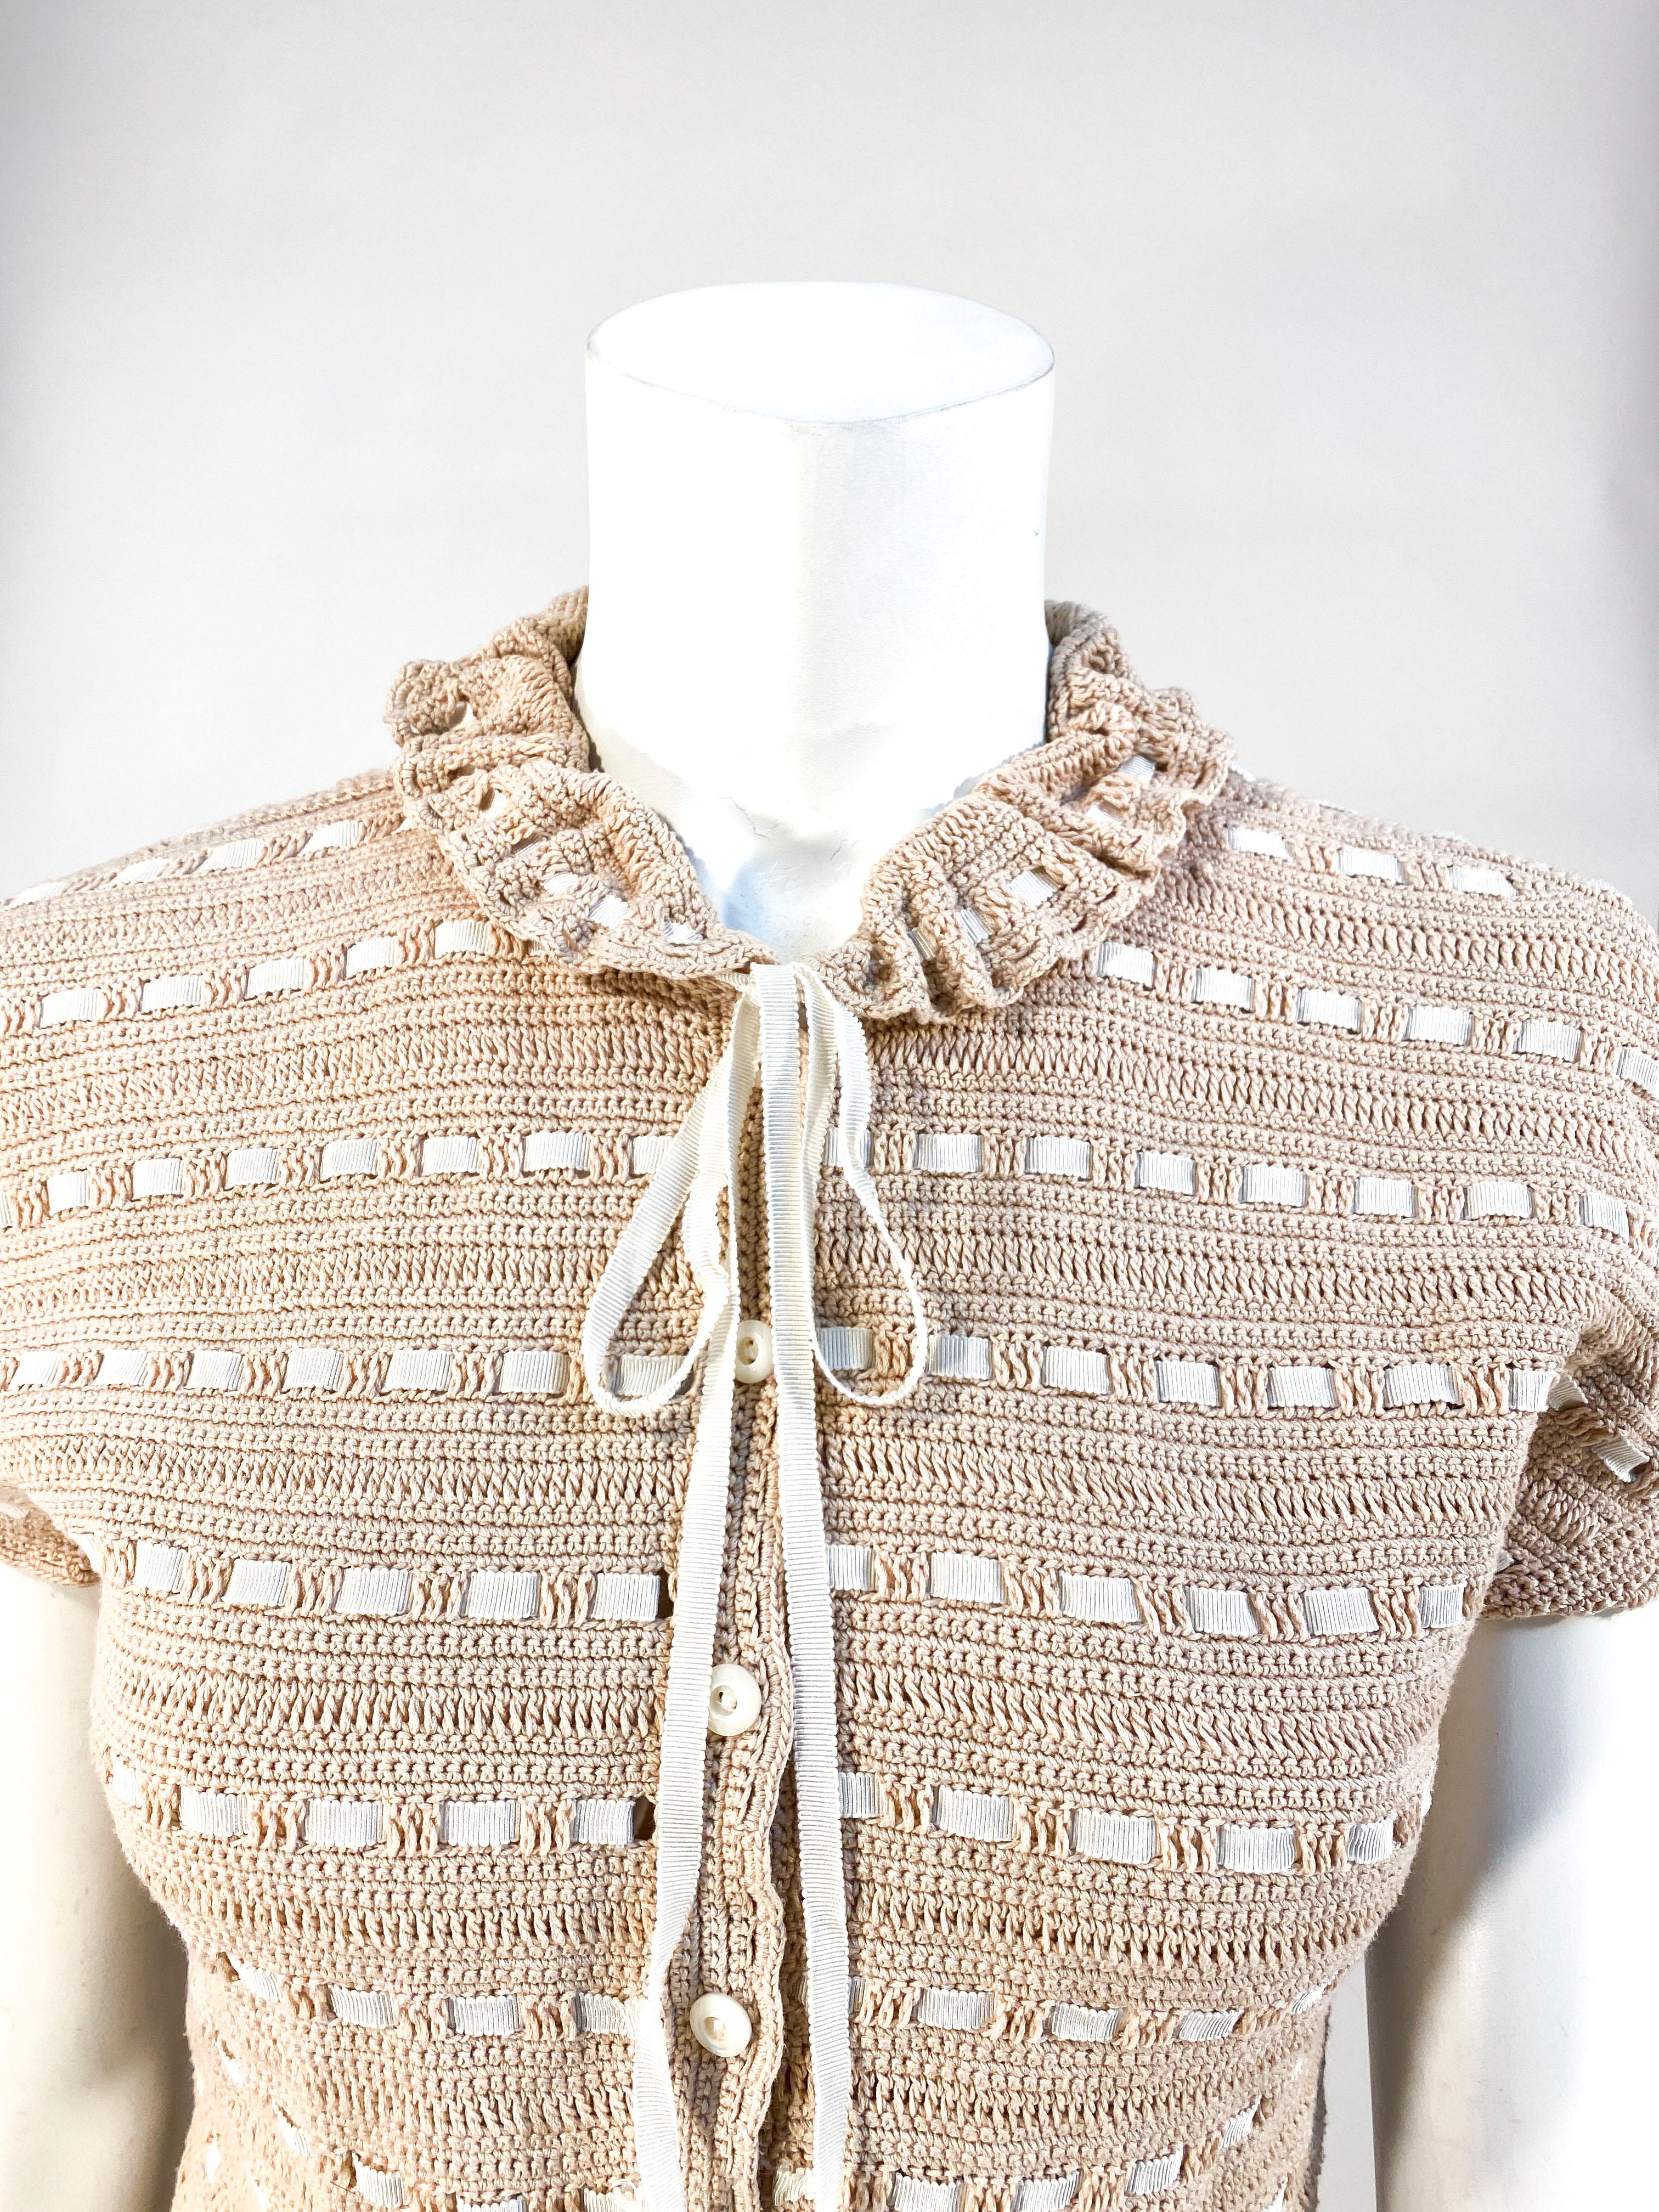 1930s Nougat-colored/l beige crochet sweater with cap sleeves, short applied gathered cuff, ruffled collar, grosgrain ribbon tie and woven alternating rows. The edges all around the sweater have small scalloped trim, the front closure has mother of